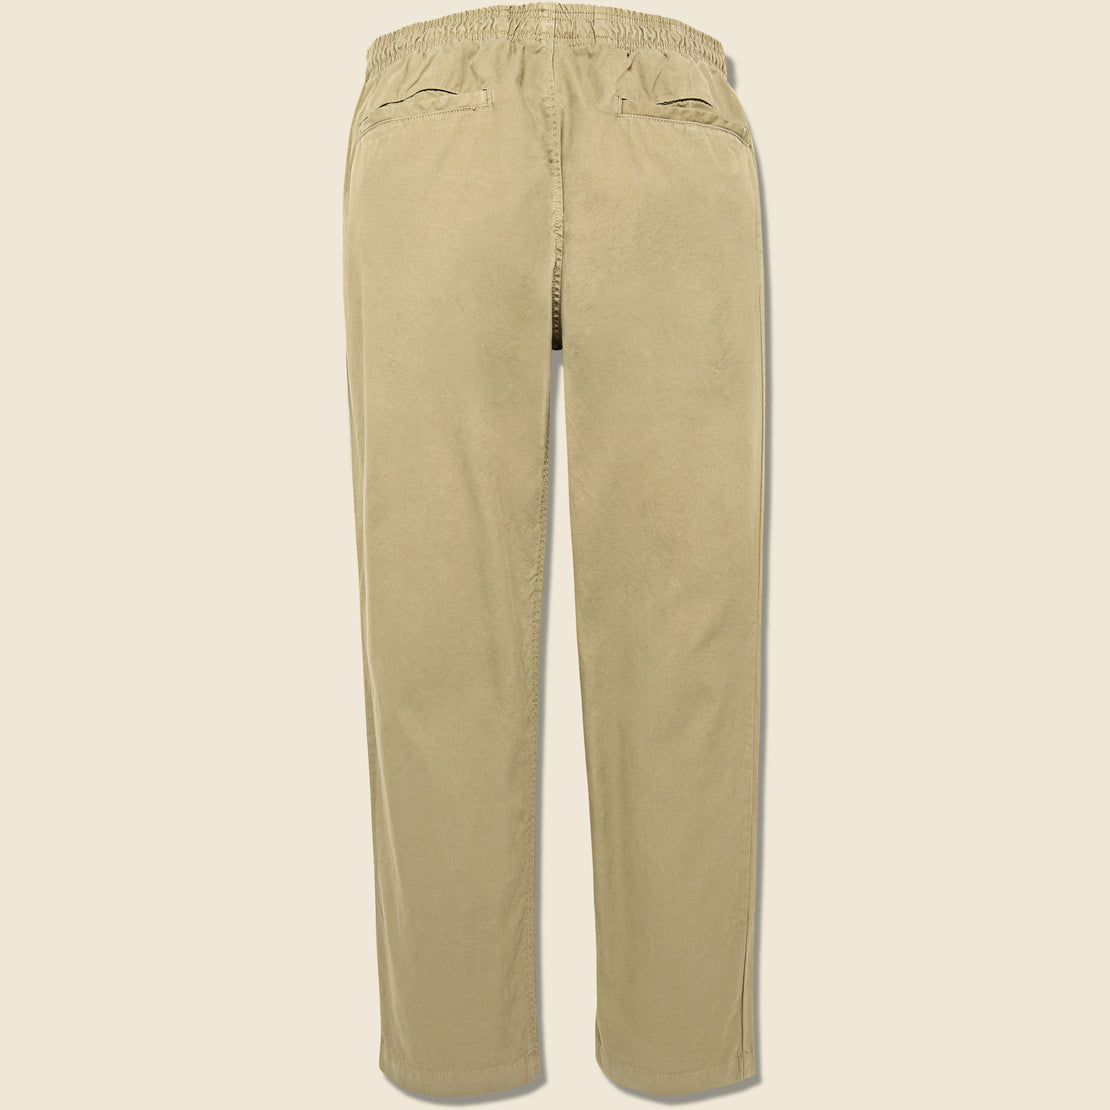 Twill Easy Chino - Field - Save Khaki - STAG Provisions - Pants - Lounge